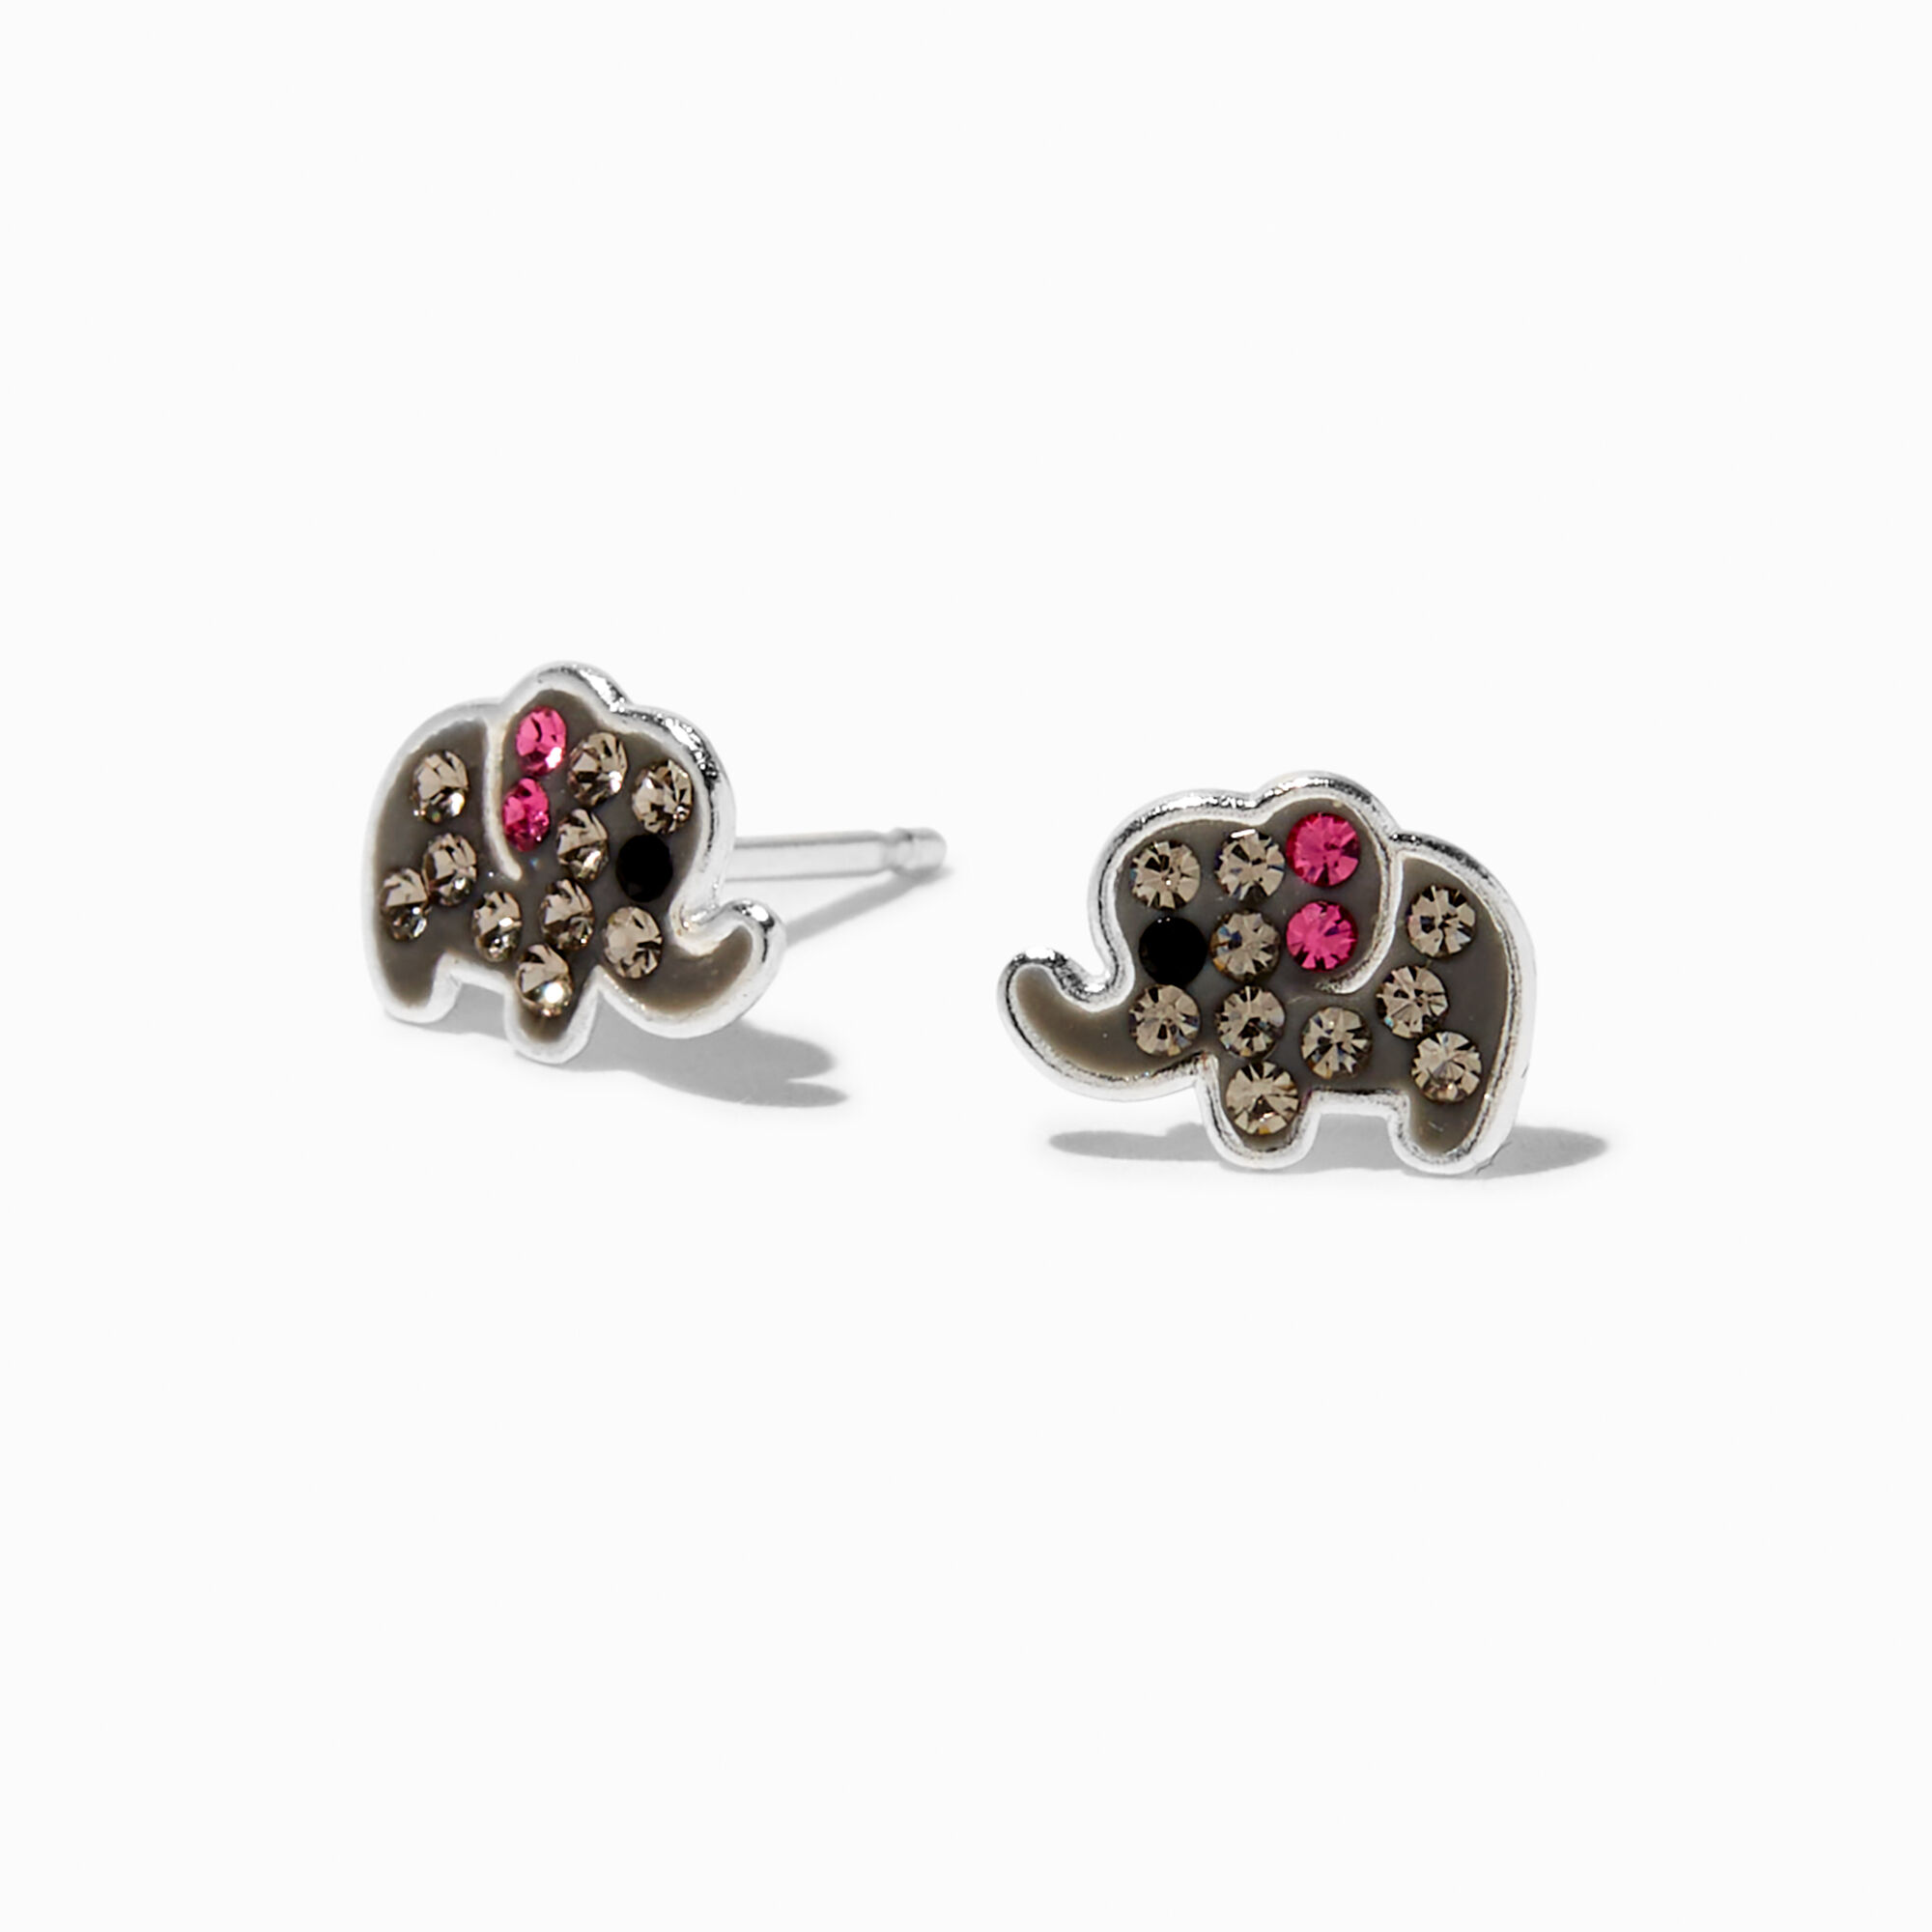 View Claires Crystal Elephant Stud Earrings Silver information